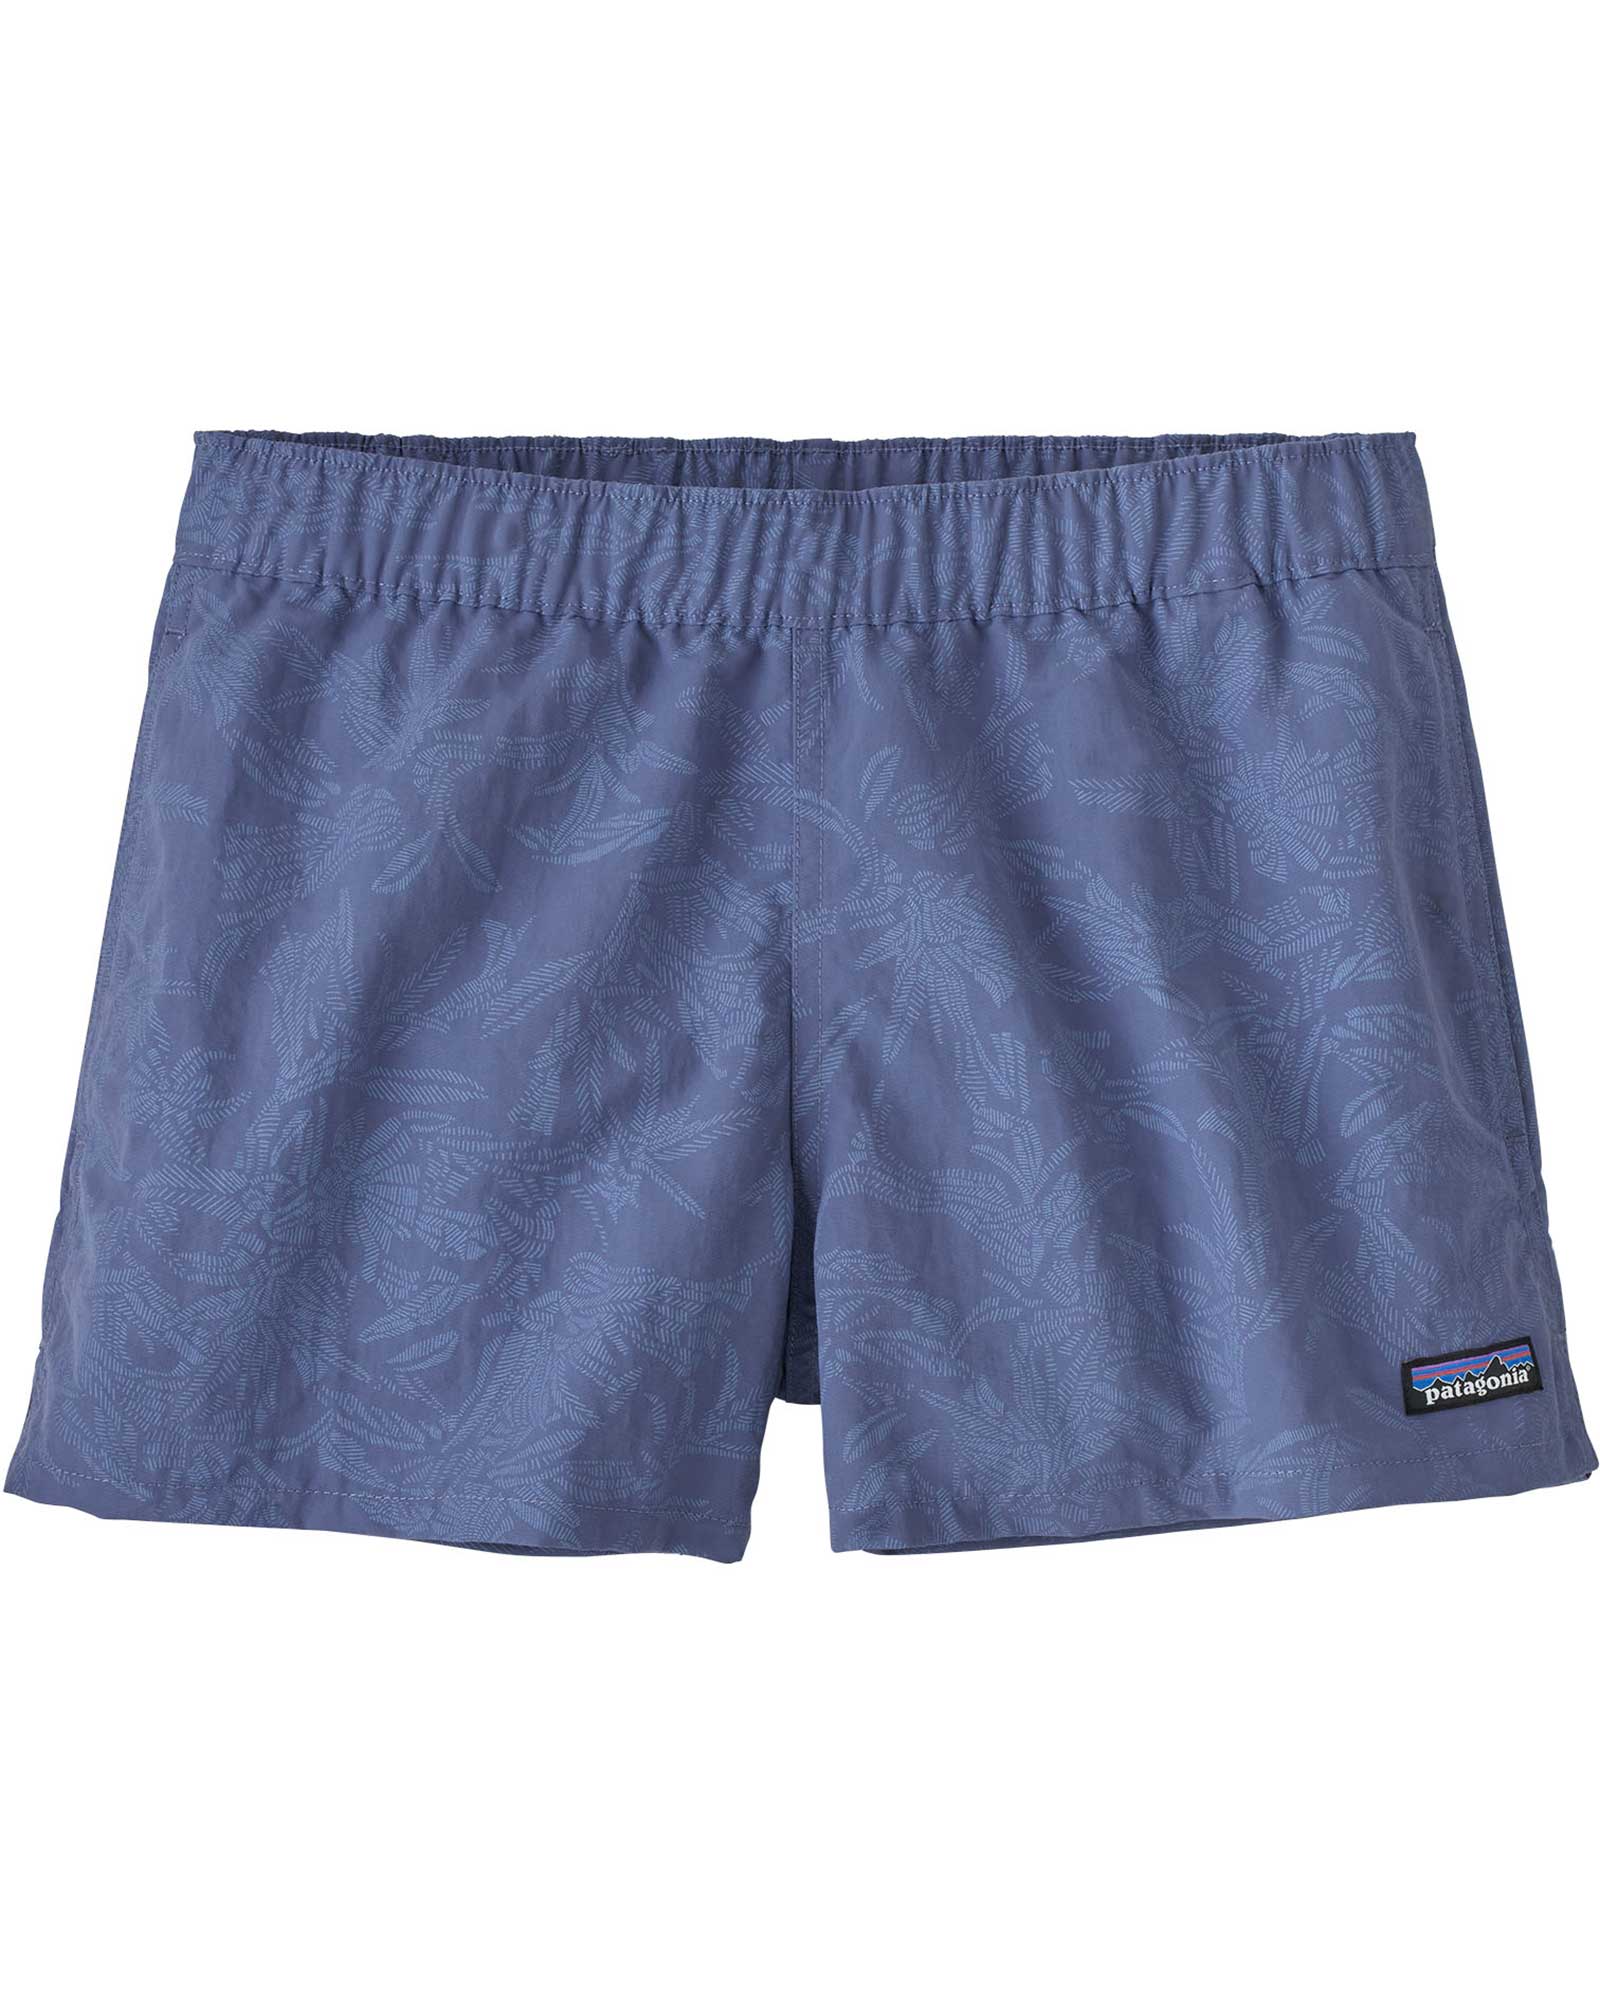 Patagonia Barely Baggies Women’s Shorts - Current Blue/Monkey Flower L